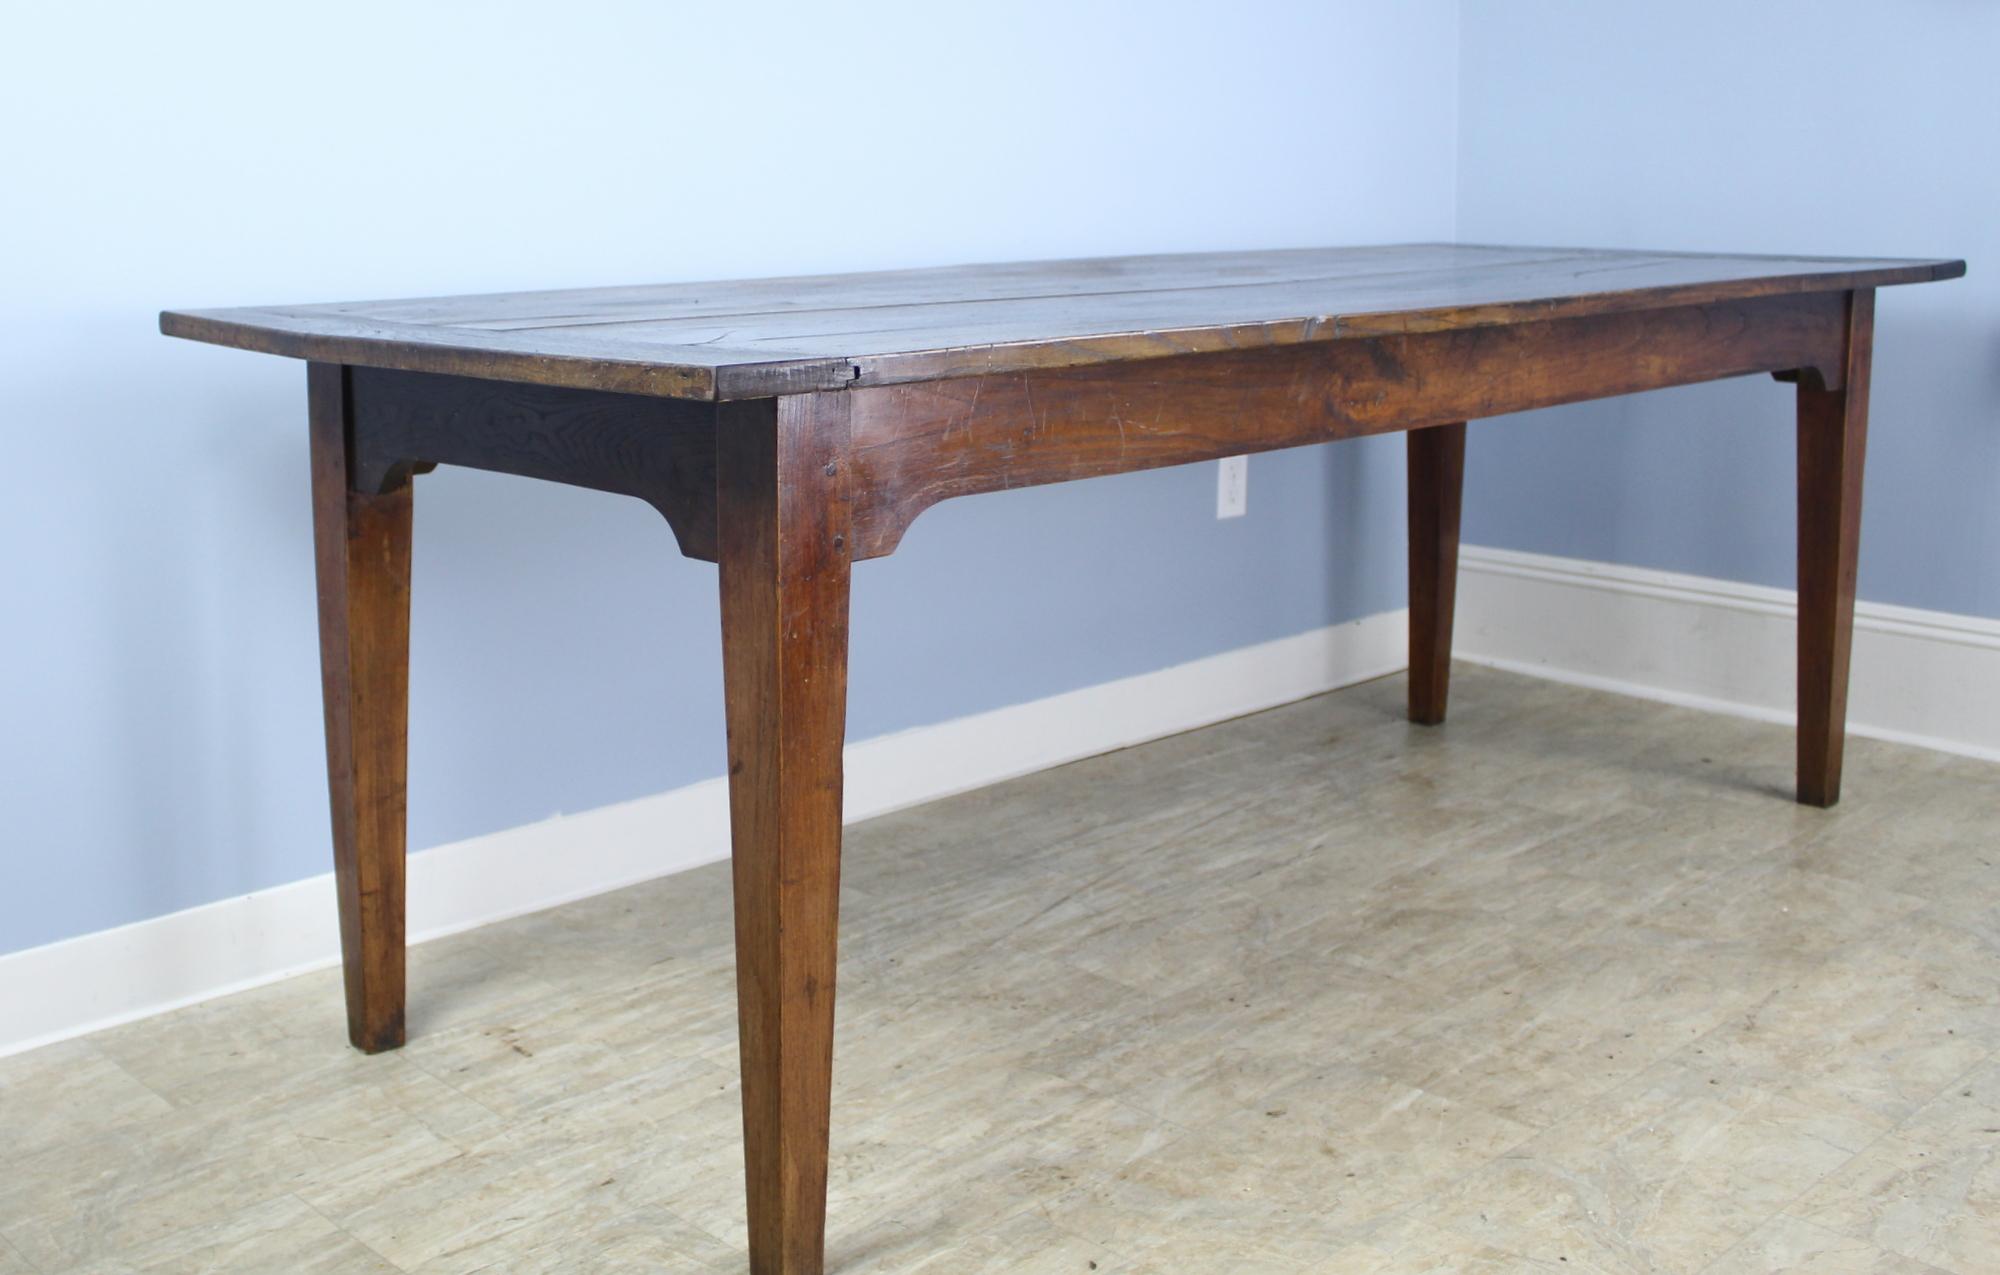 A Classic dark chestnut French farmhouse table. Slender tapered legs positioned near the end of the top to maximize seating between the legs. Color is a rich warm chestnut with a good, aged, patina. Breadboard ends on the top. Apron height is a good